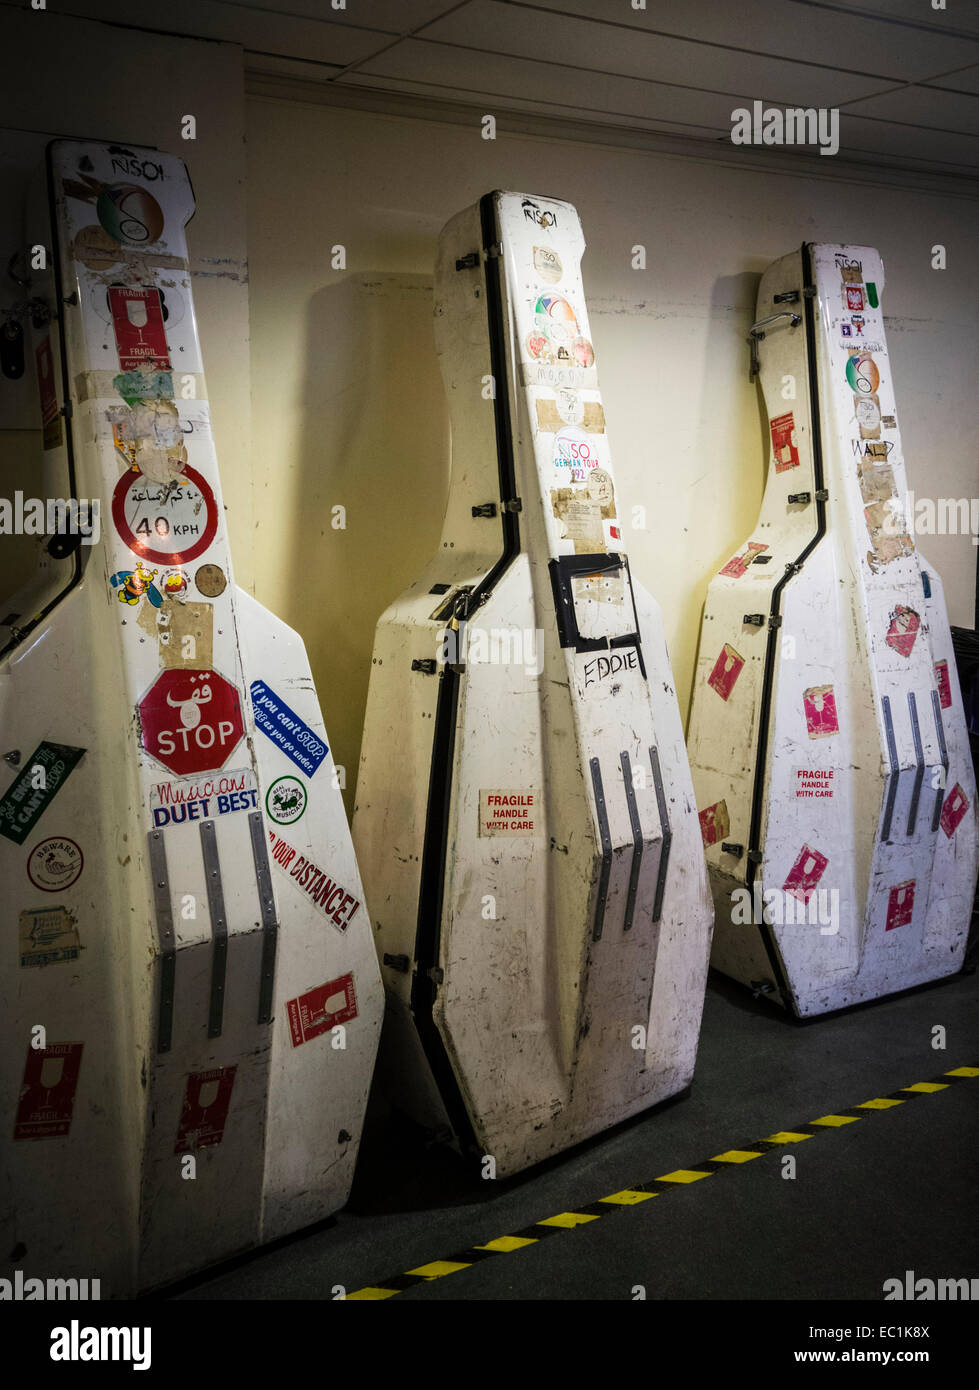 Double bass cases covered in stickers. Stock Photo